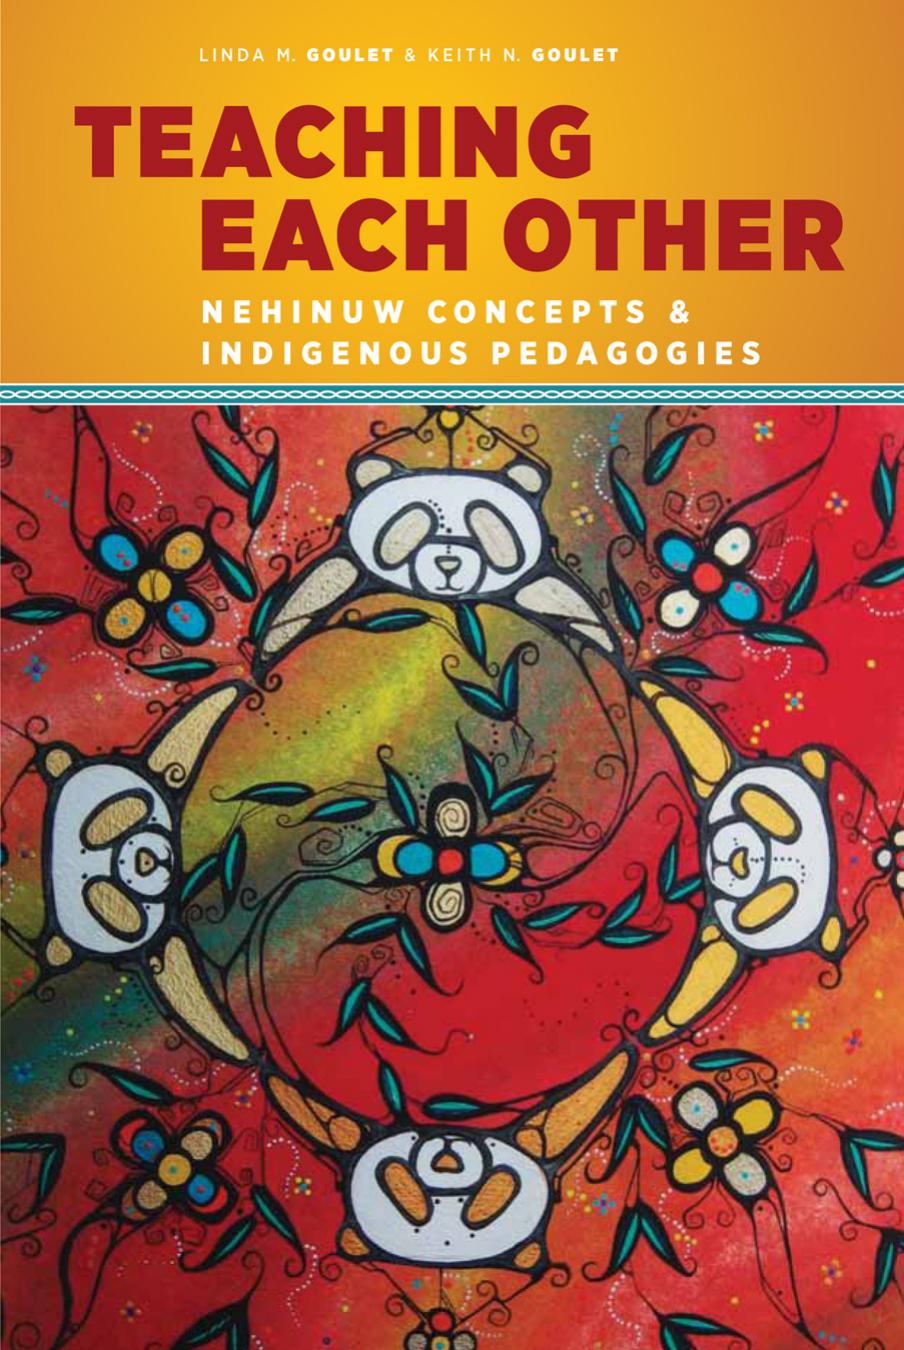 Teaching Each Other: Nehinuw Concepts and Indigenous Pedagogies by Linda M. Goulet Keith N. Goulet